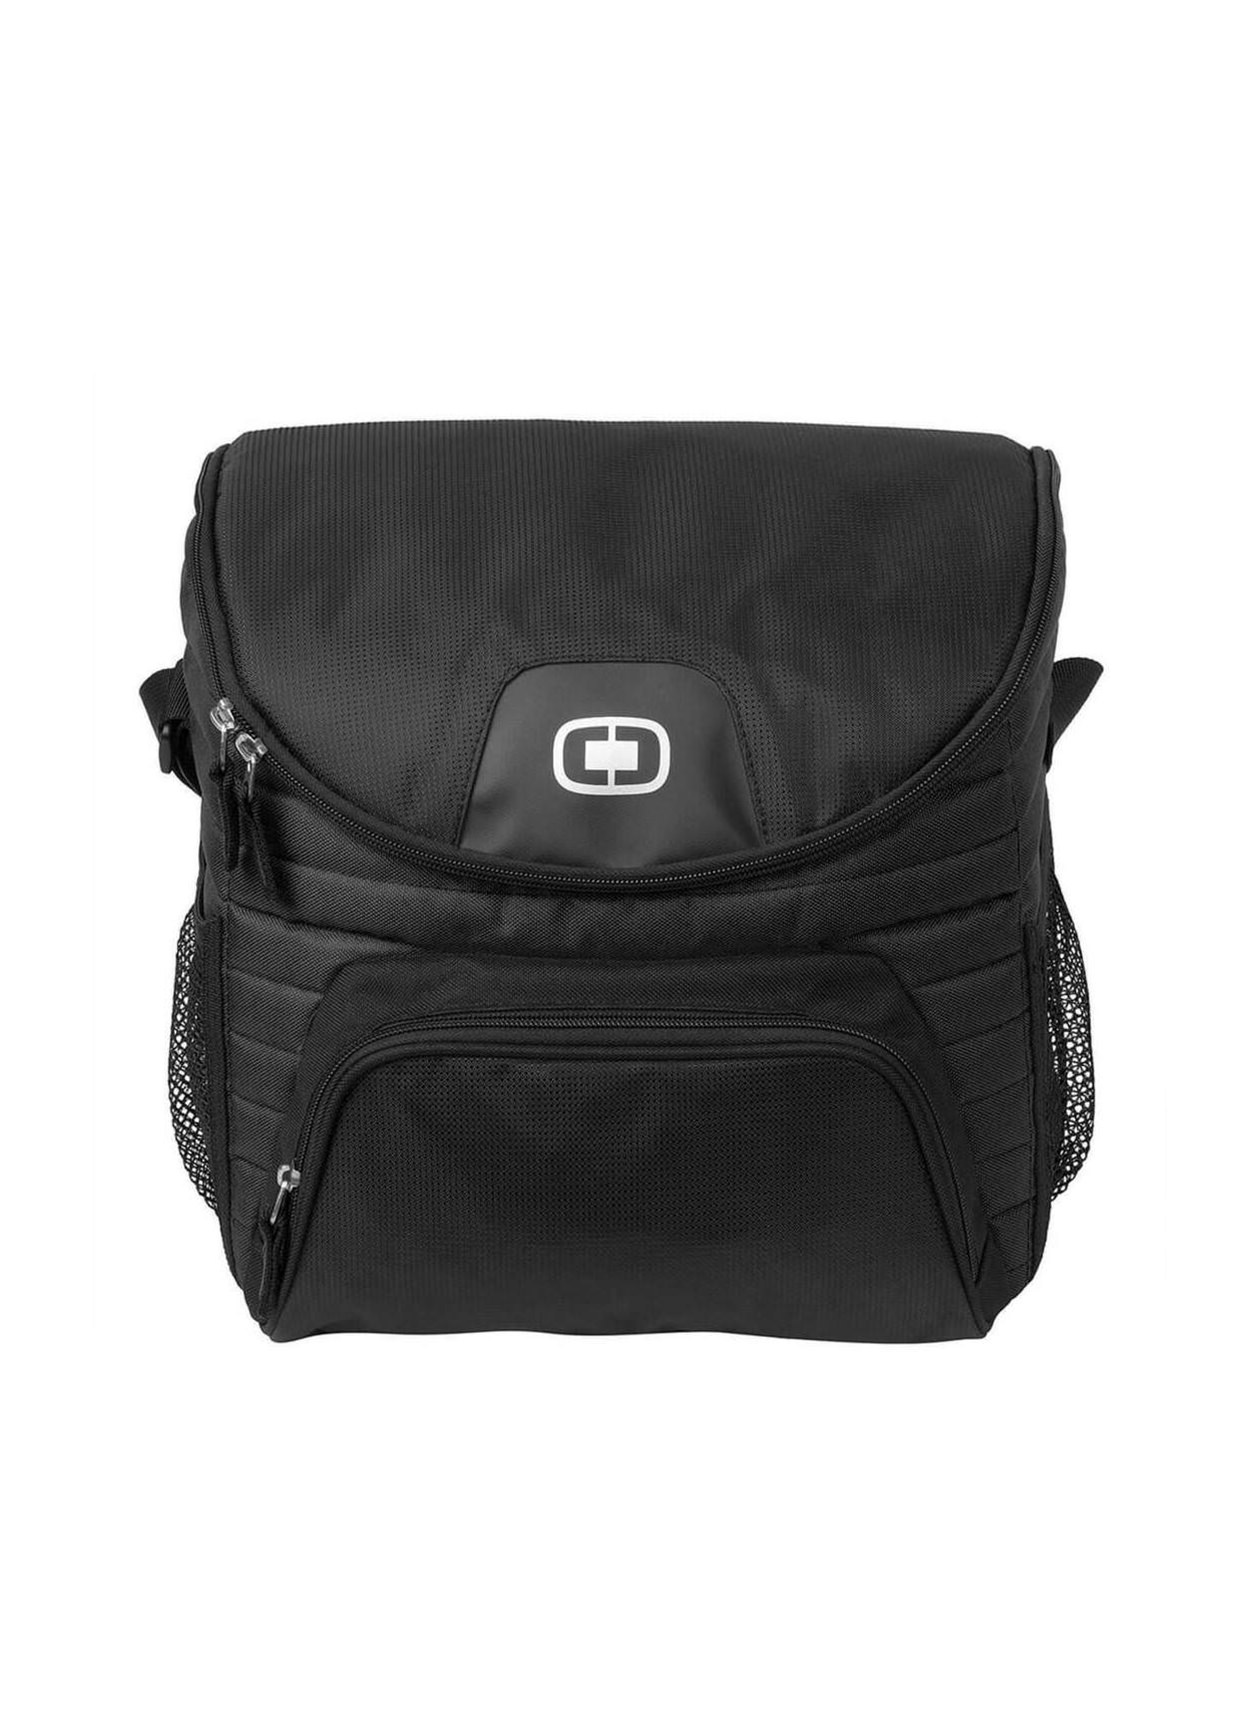 OGIO Black Chill 18-24 Can Cooler